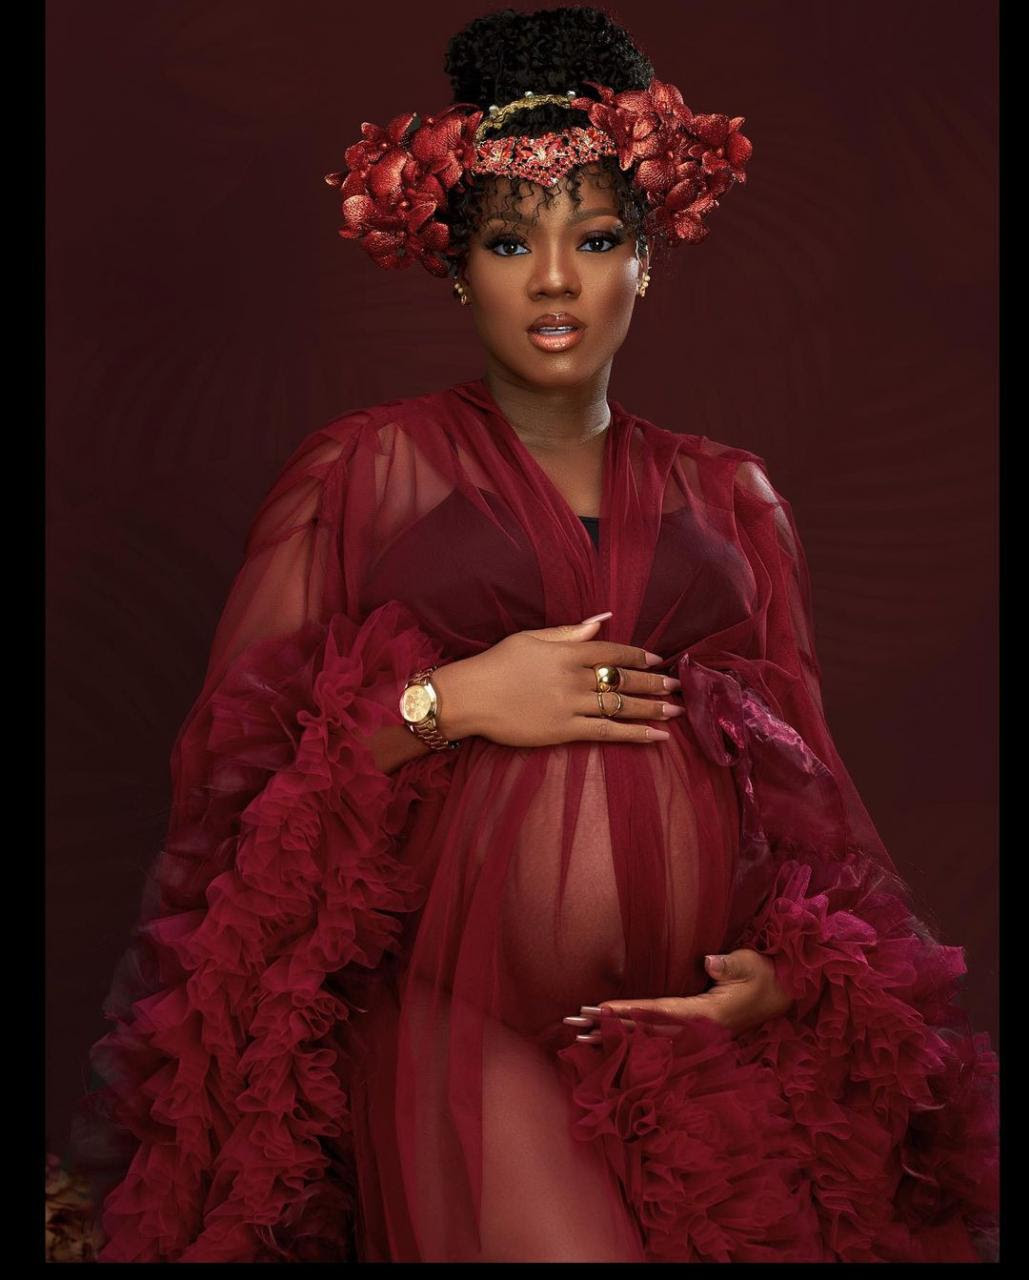 Comedian, BasketMouth and wife welcome their third child (photos)